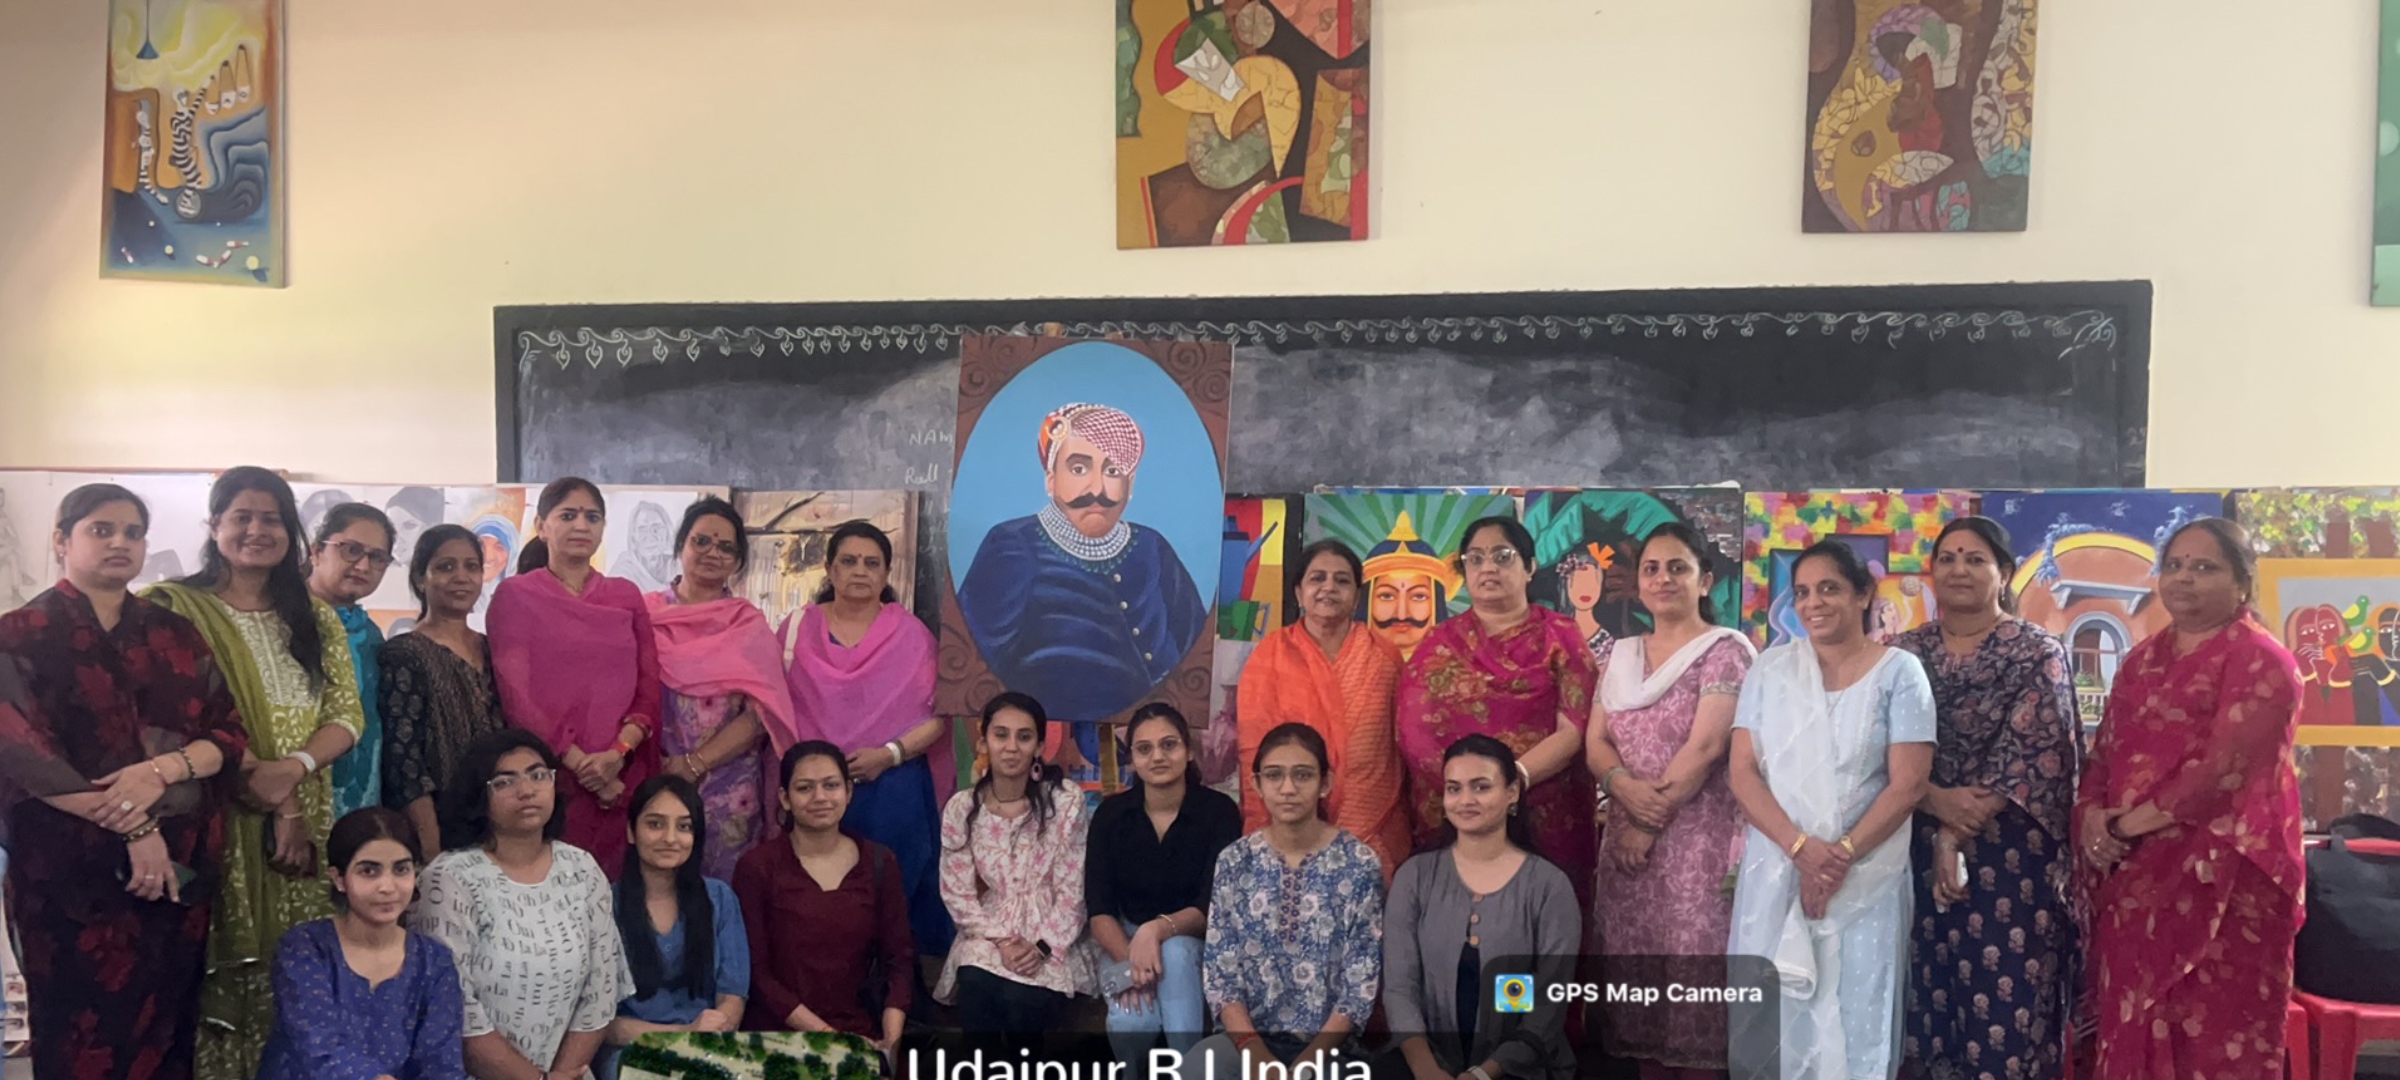 Bhupal Nobles Girls College Hosts Grand Art Exhibition on World Art Day, Showcases 102 Paintings